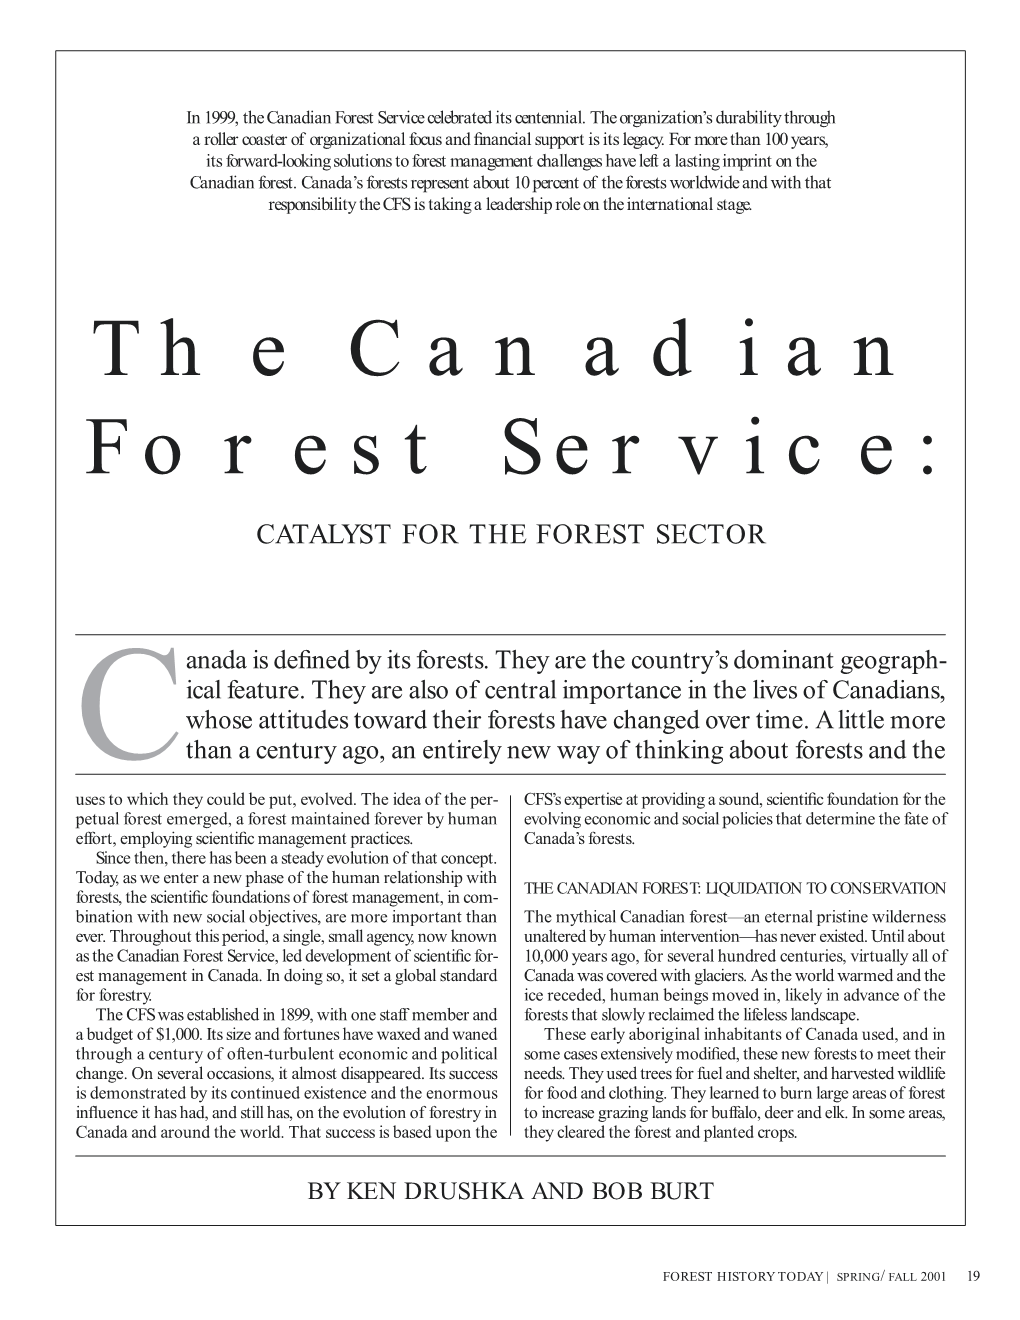 The Canadian Forest Service Celebrated Its Centennial